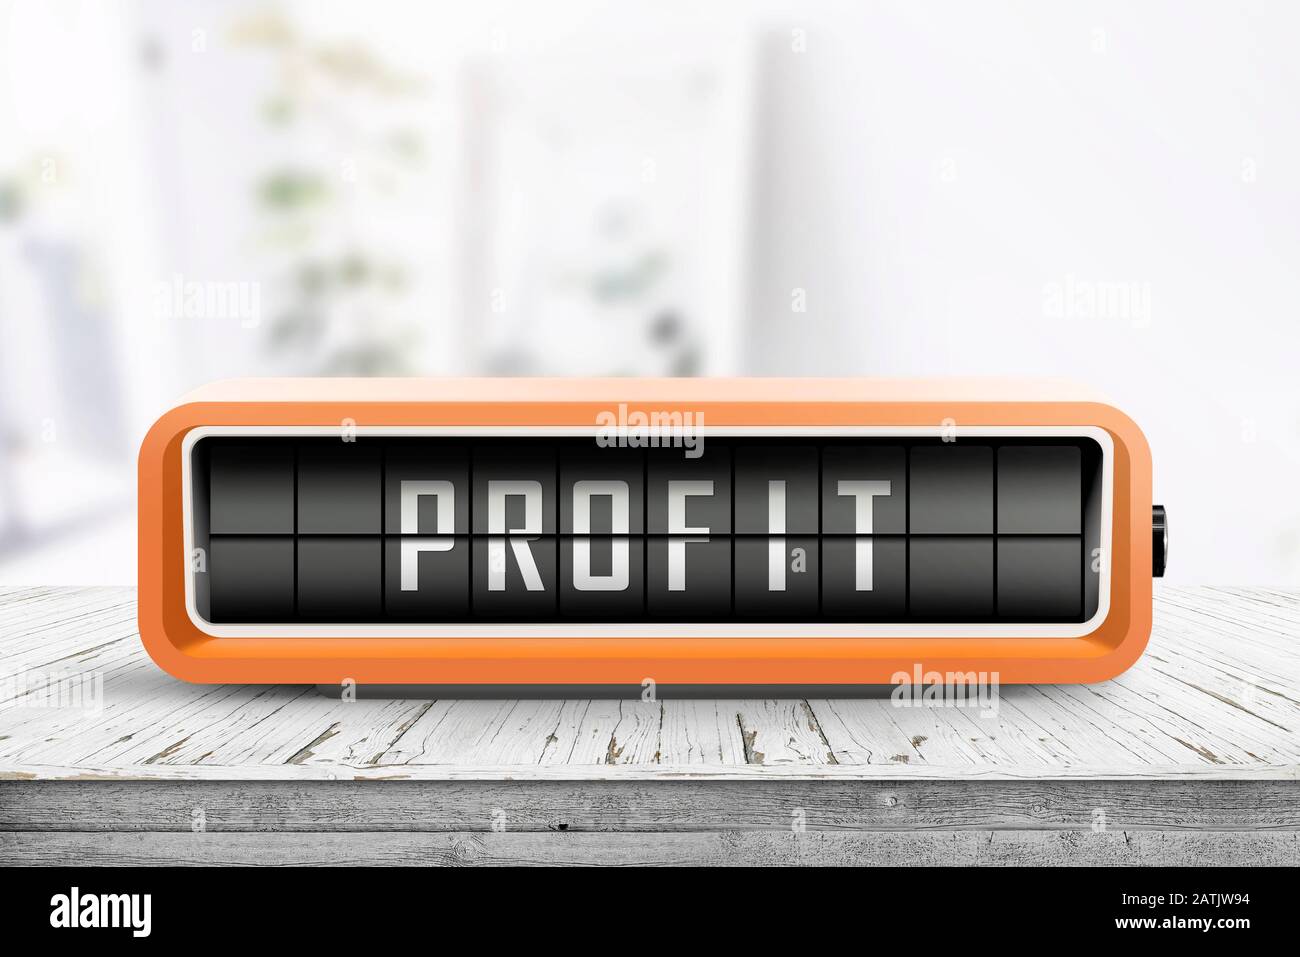 Profit message on a retro alarm device in a bright environment on a table Stock Photo